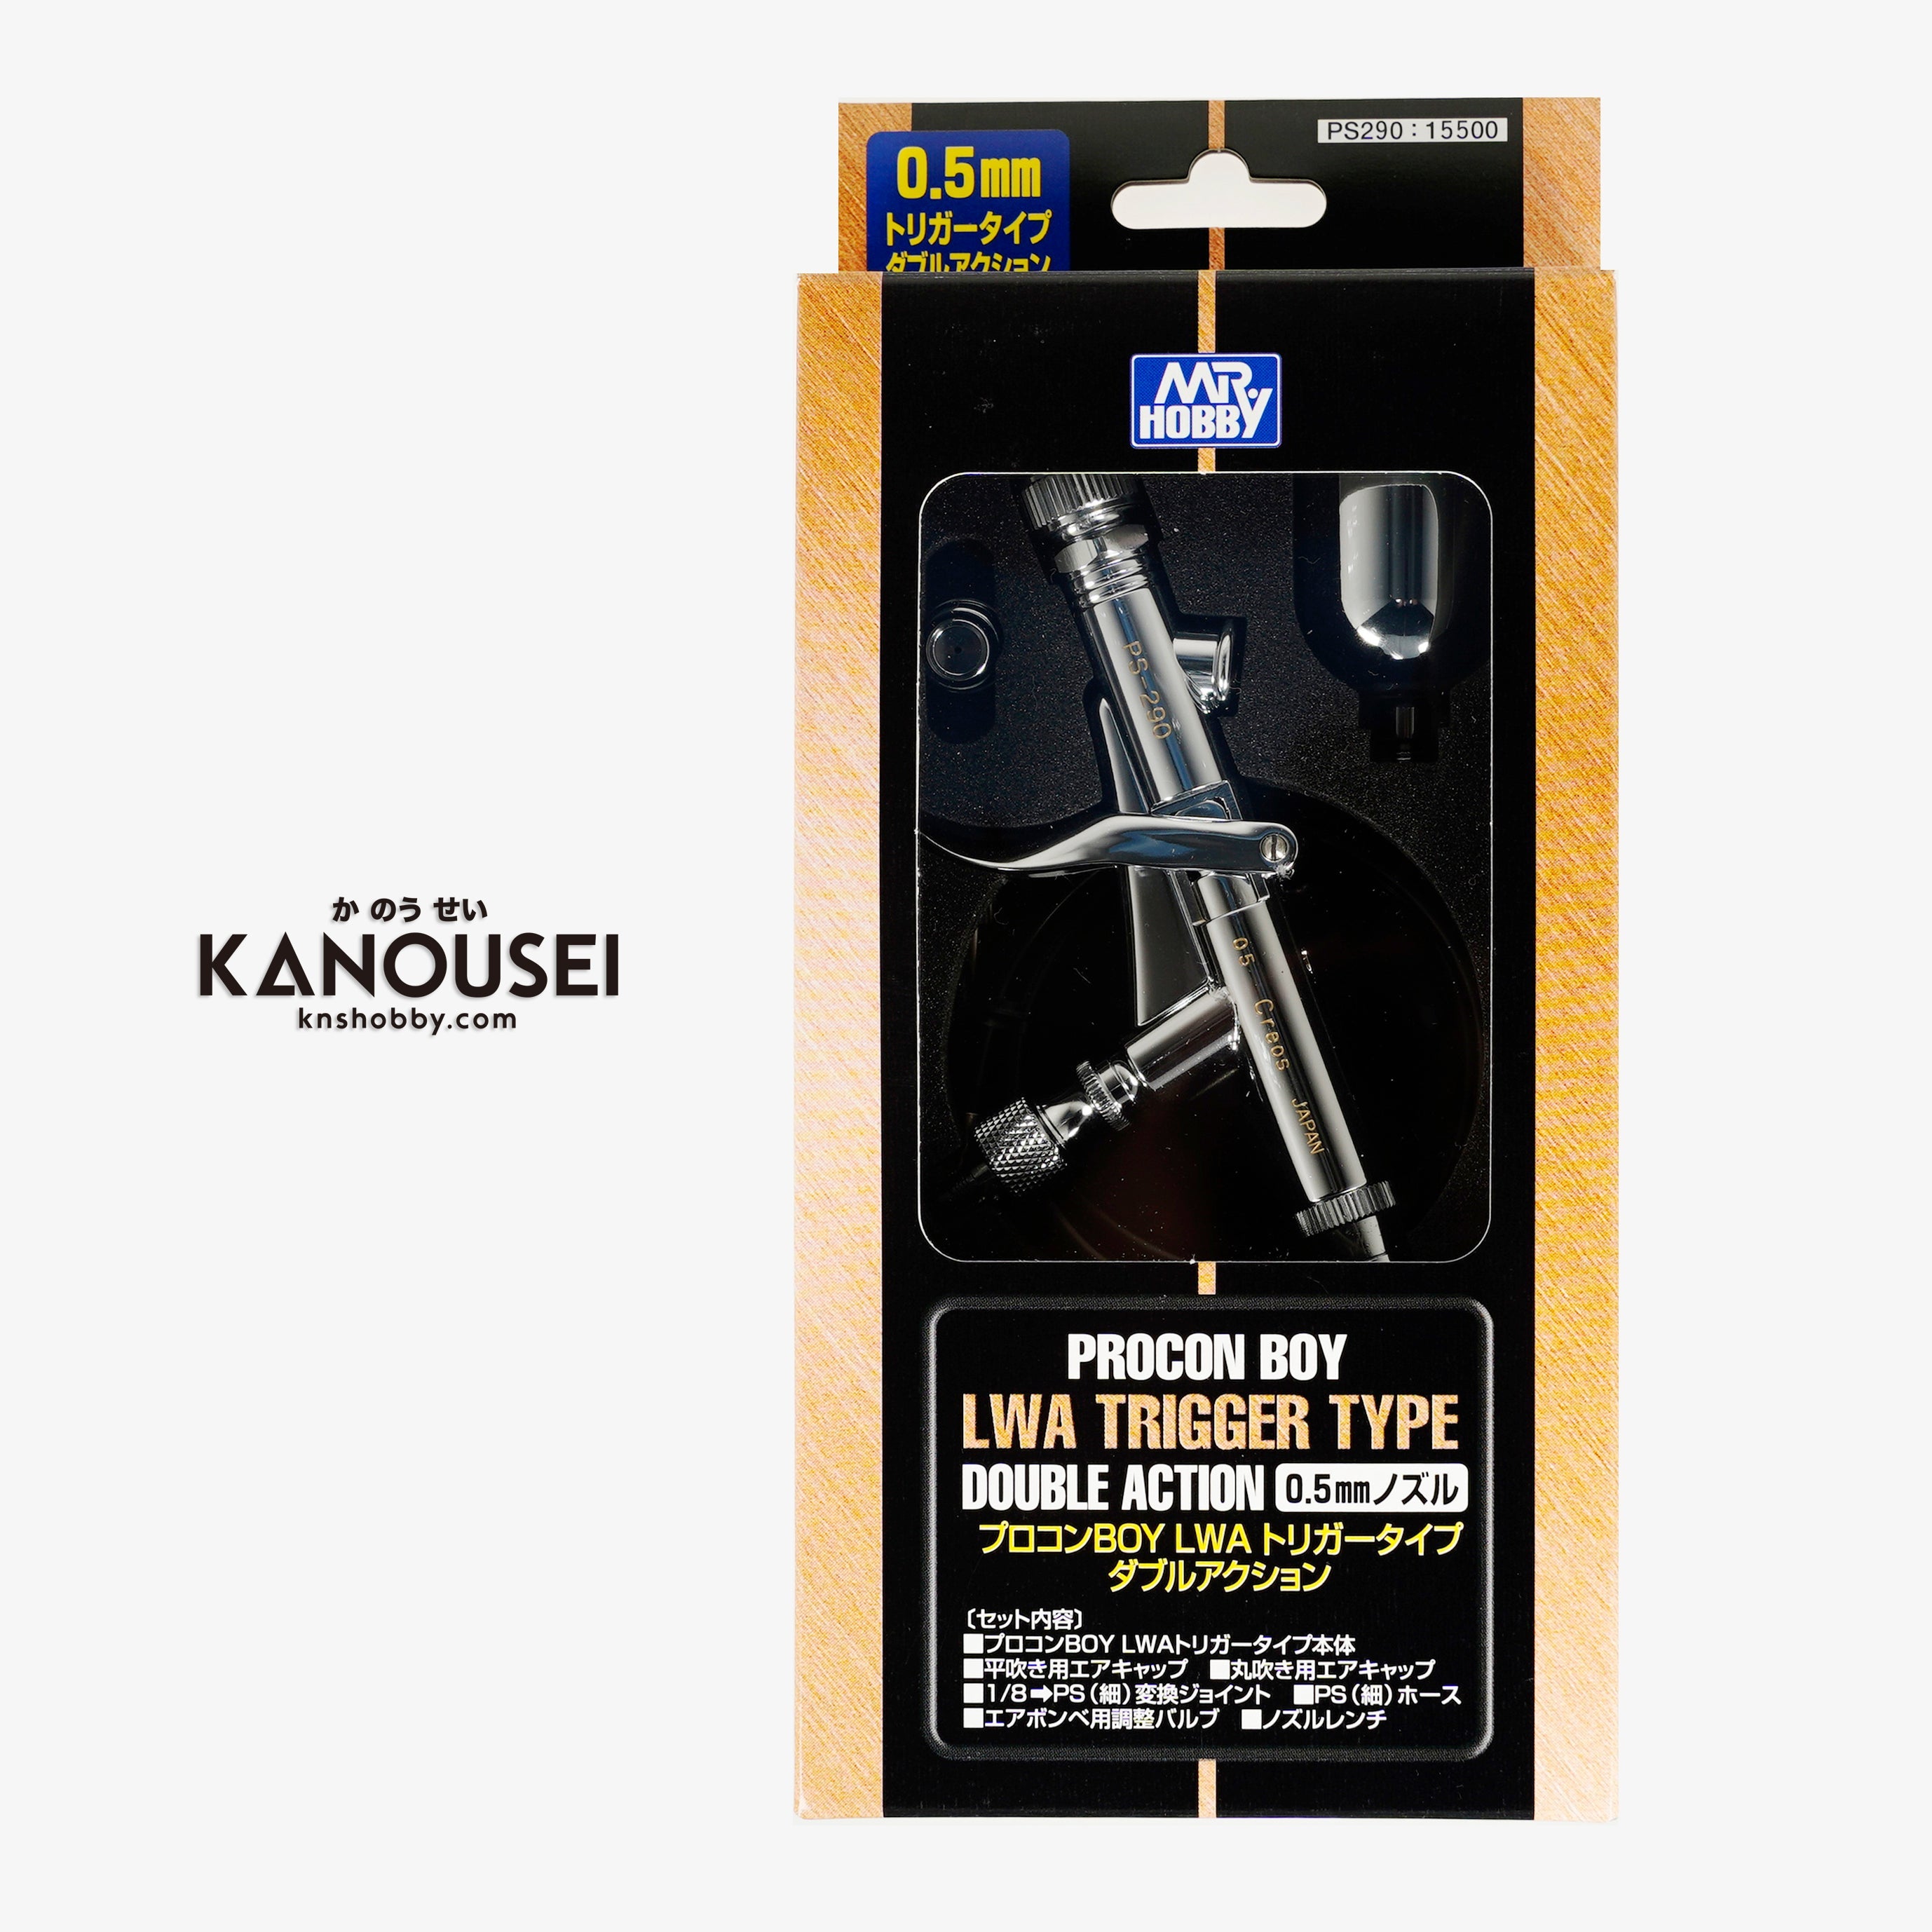 KNS Hobby PROCON BOY LWA Trigger Type Double Action 0.5 mm PS290 –  KANOUSEI HOBBY